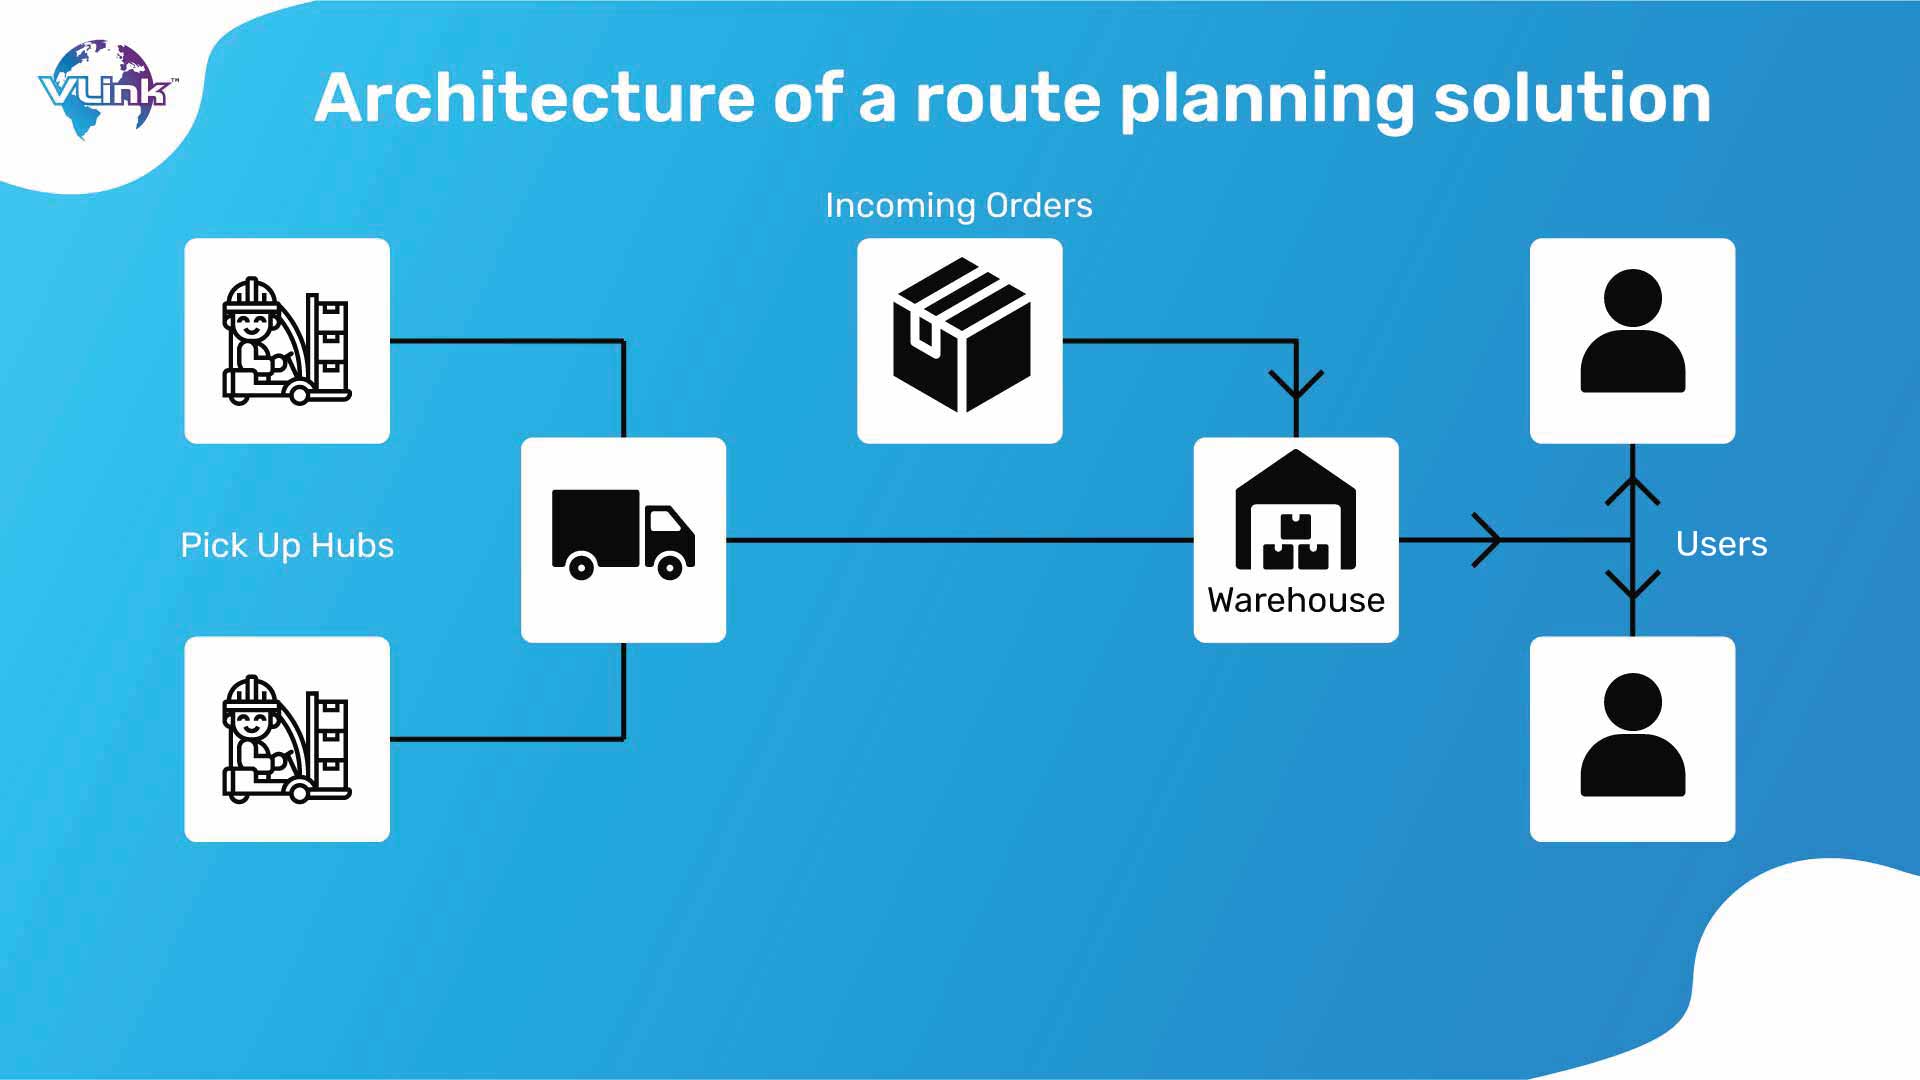 Architecture of a route planning solution